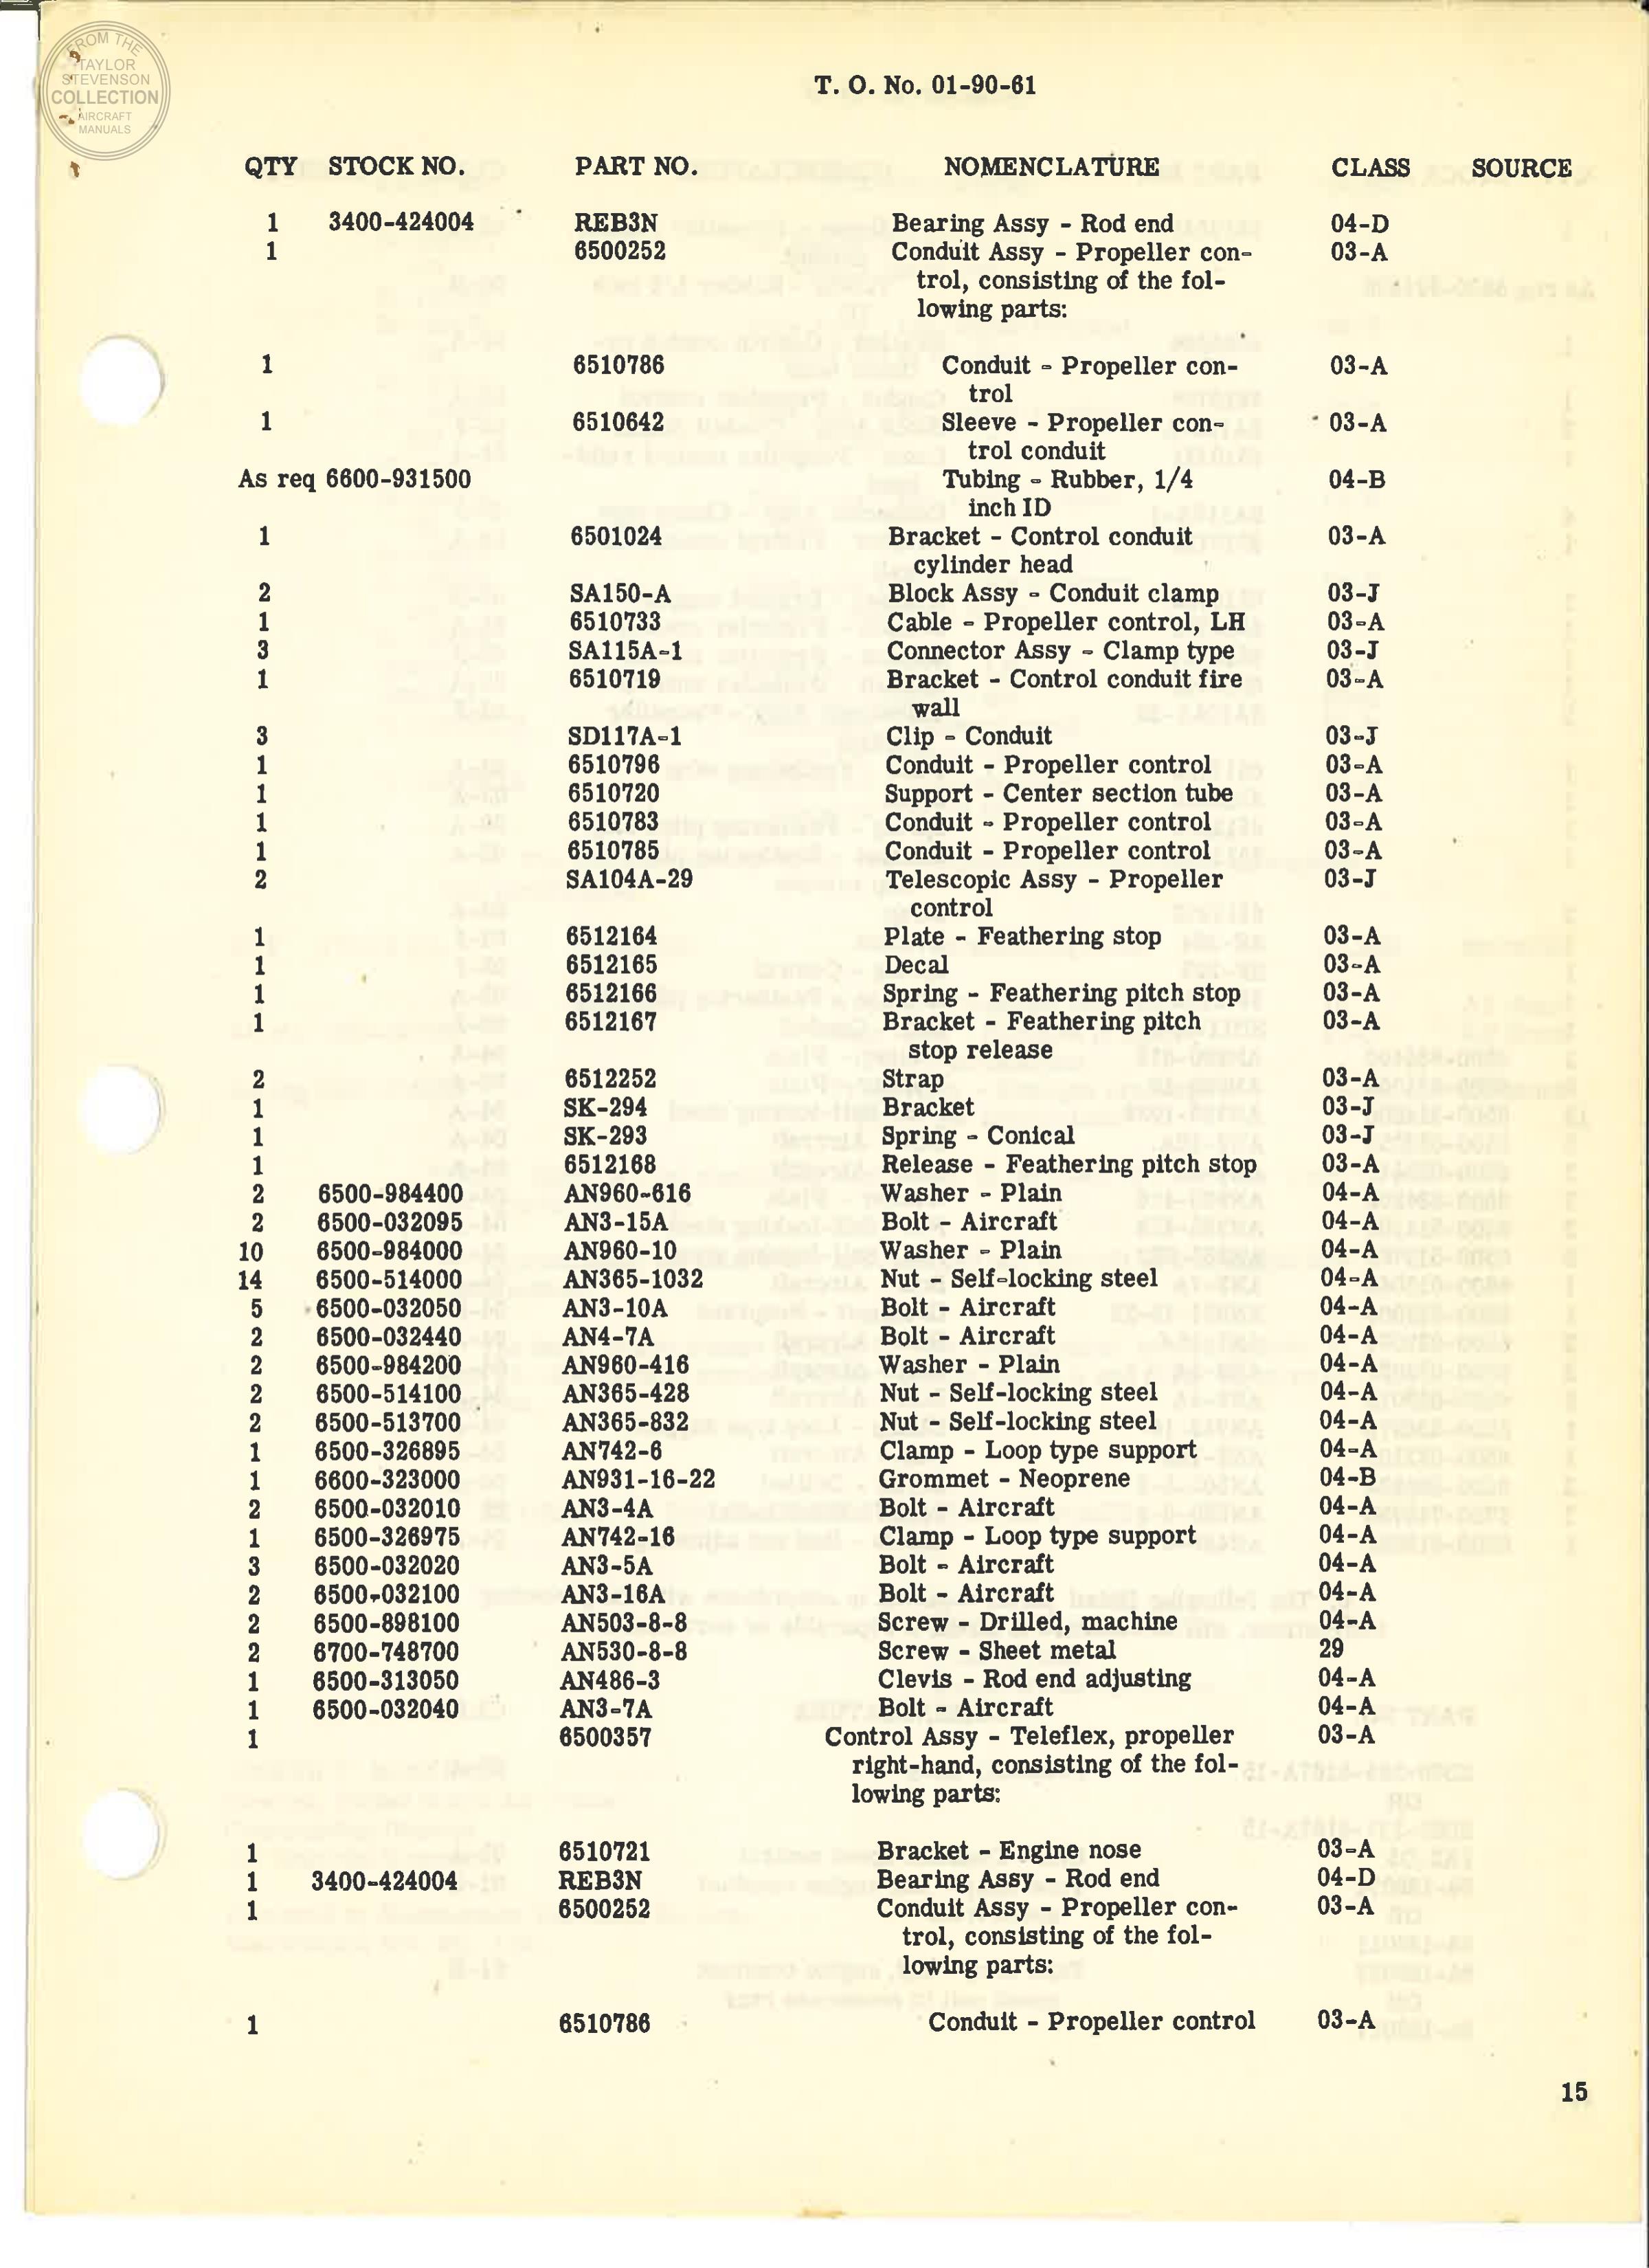 Sample page 54 from AirCorps Library document: Beech Technical Orders - 01-90-5 through 01-90-68